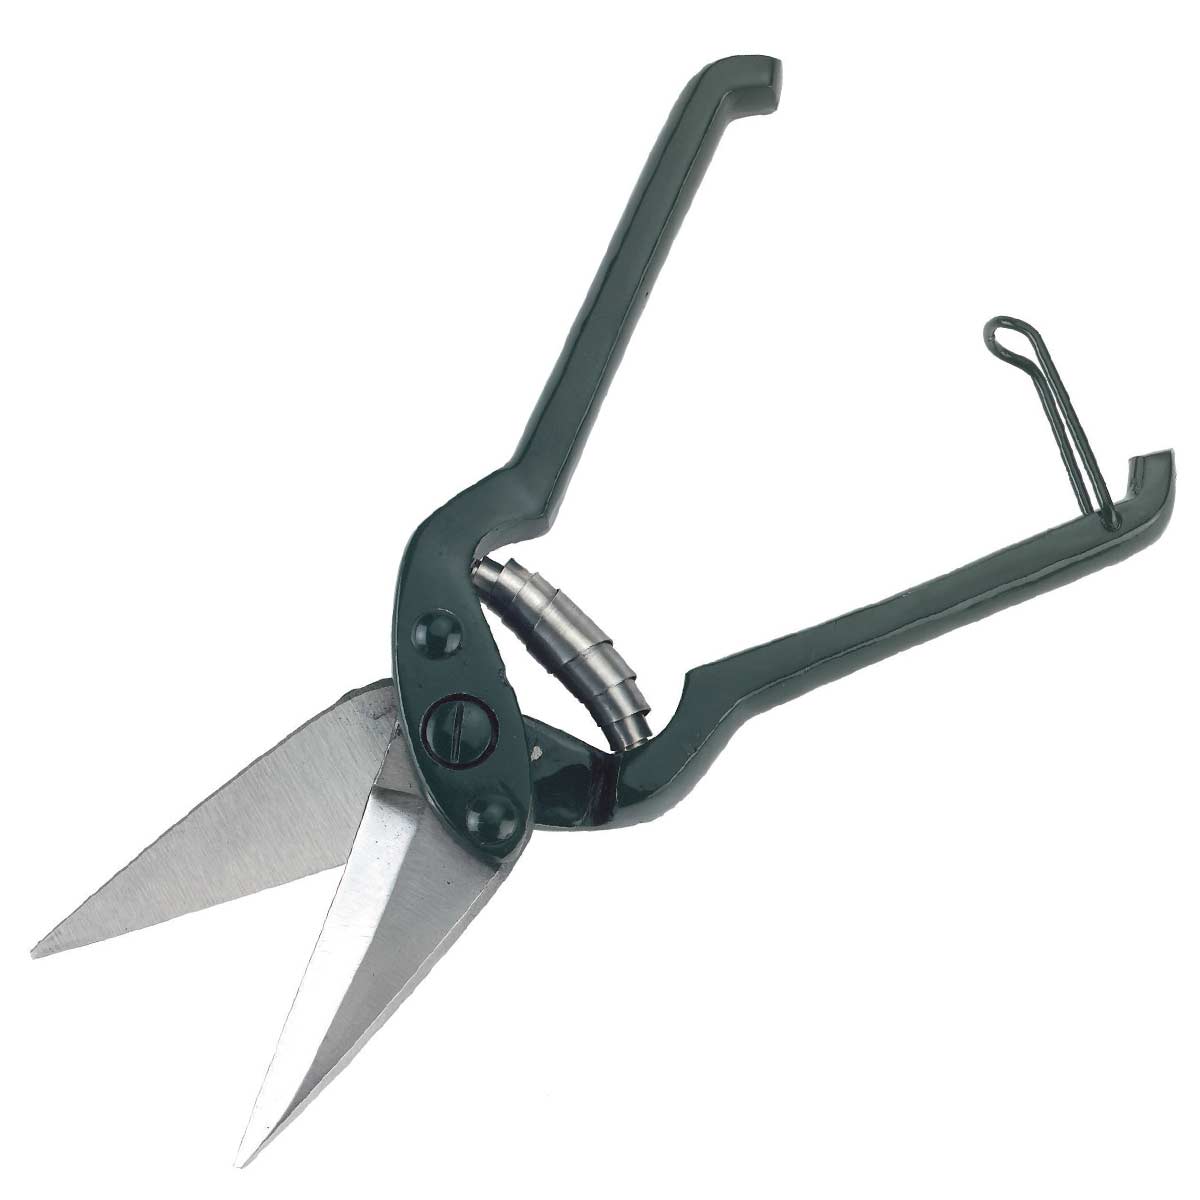 Claw shear with teeth for sheep